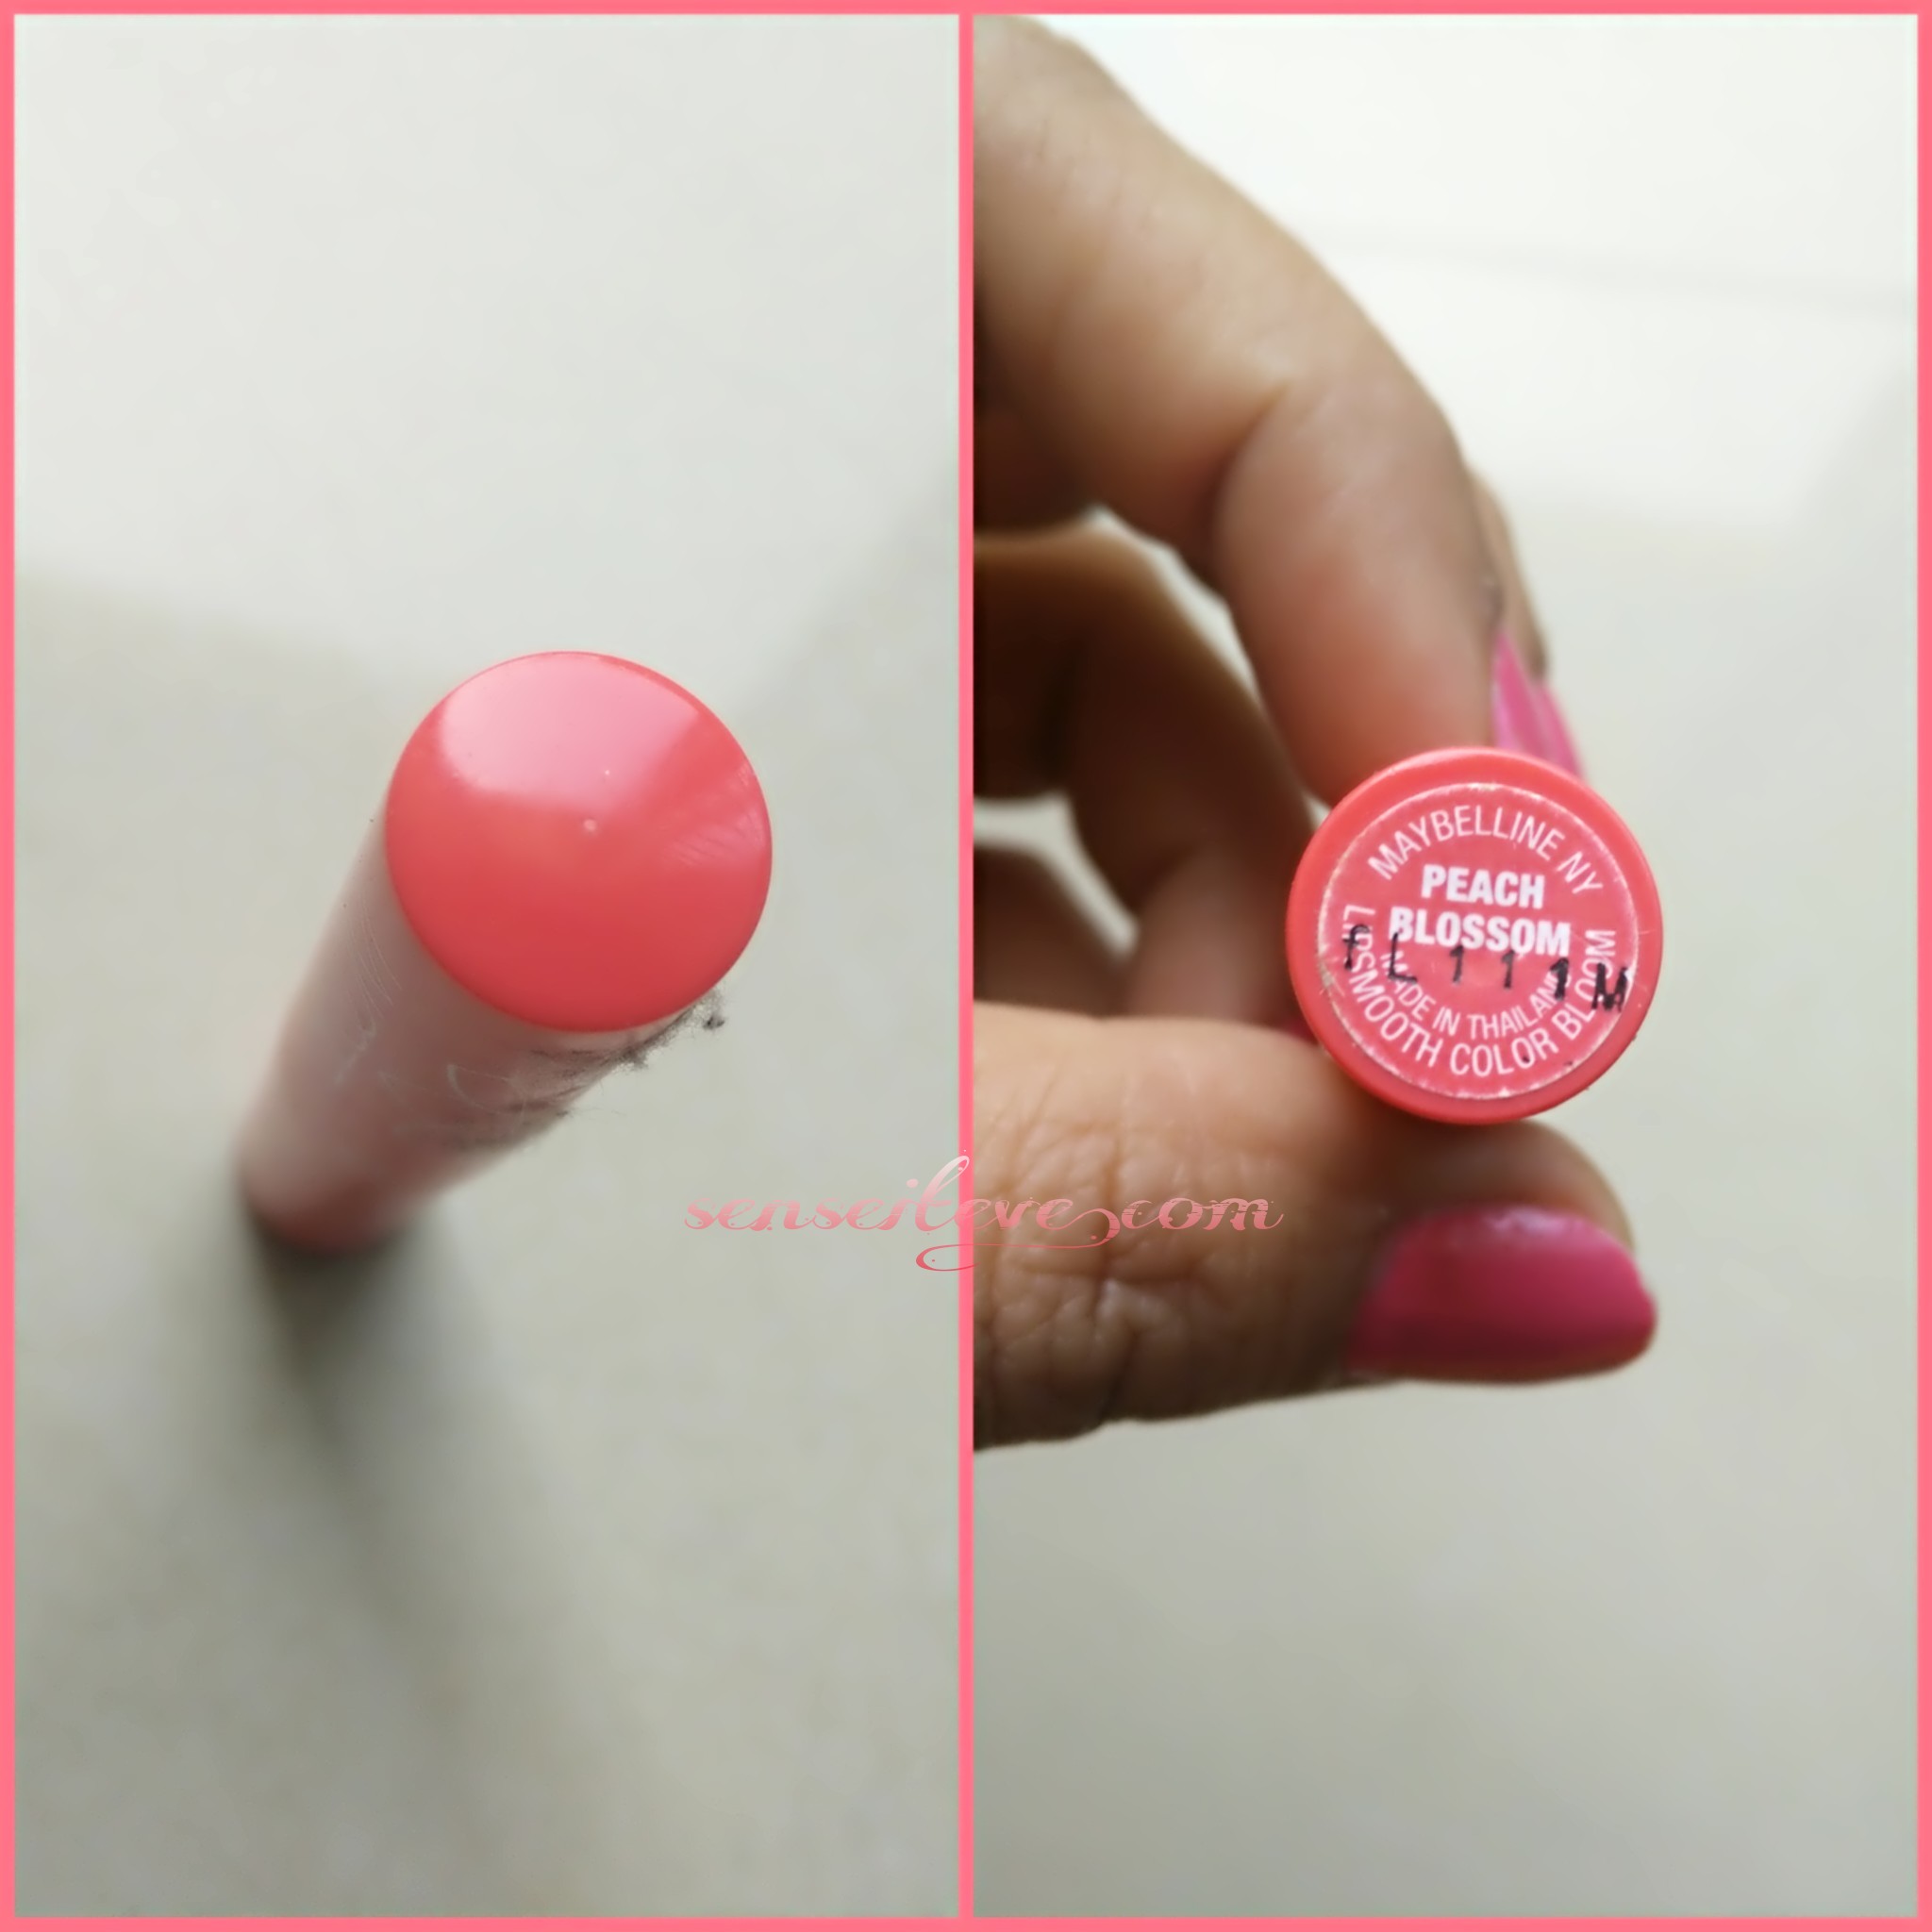 Maybelline Color Bloom Peach Blossom Review